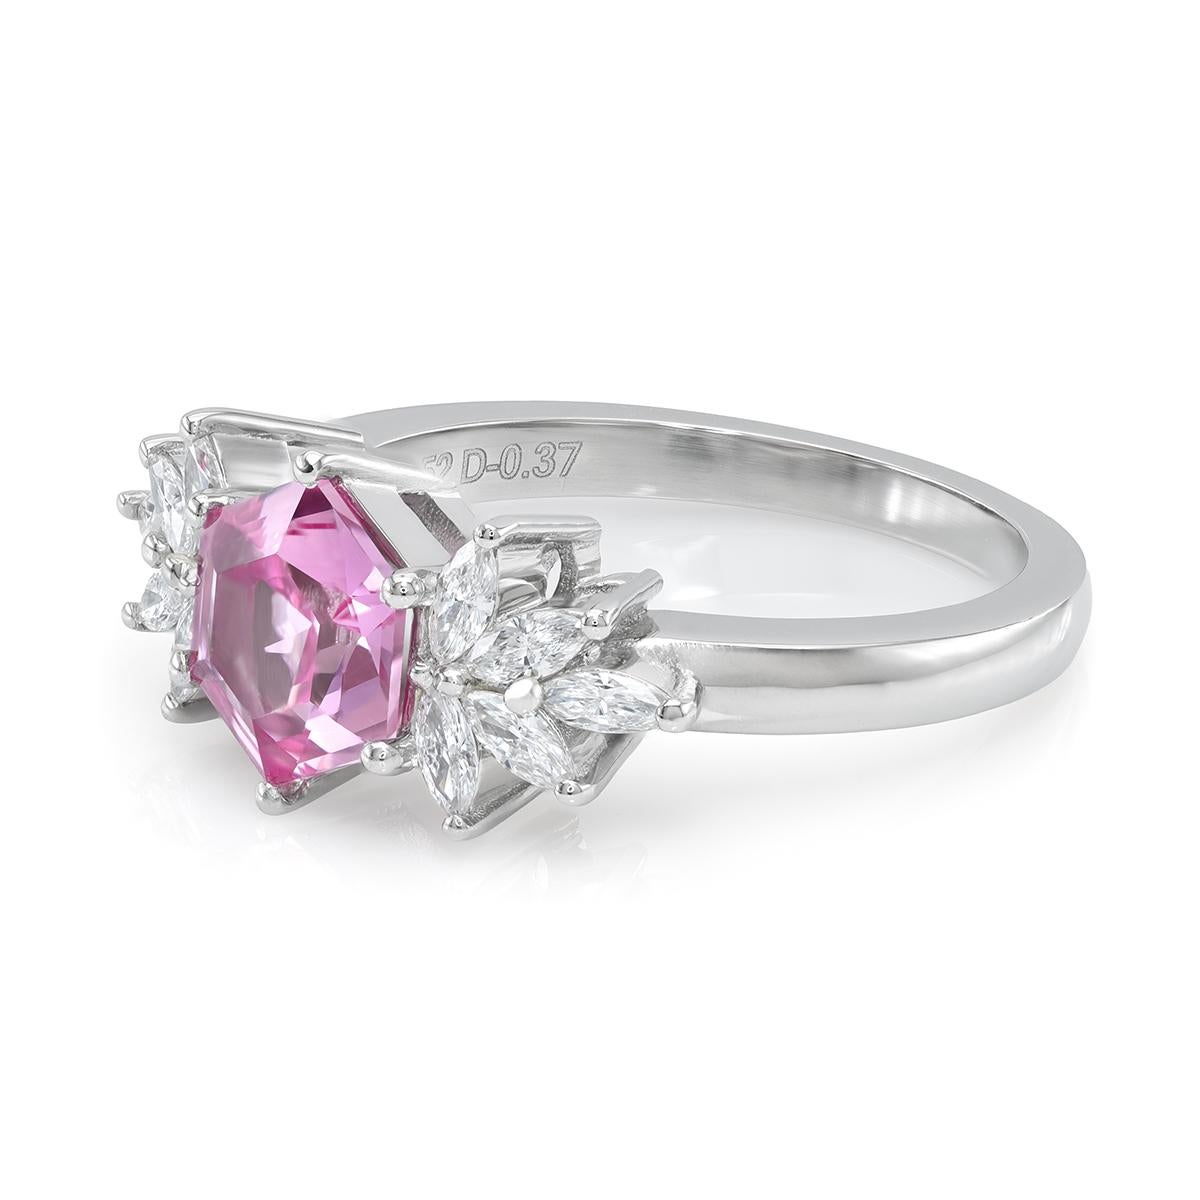 Mixed Cut GIA Certified 1.52 Carats Purple Pink Sapphire Diamonds set in Platinum Ring For Sale